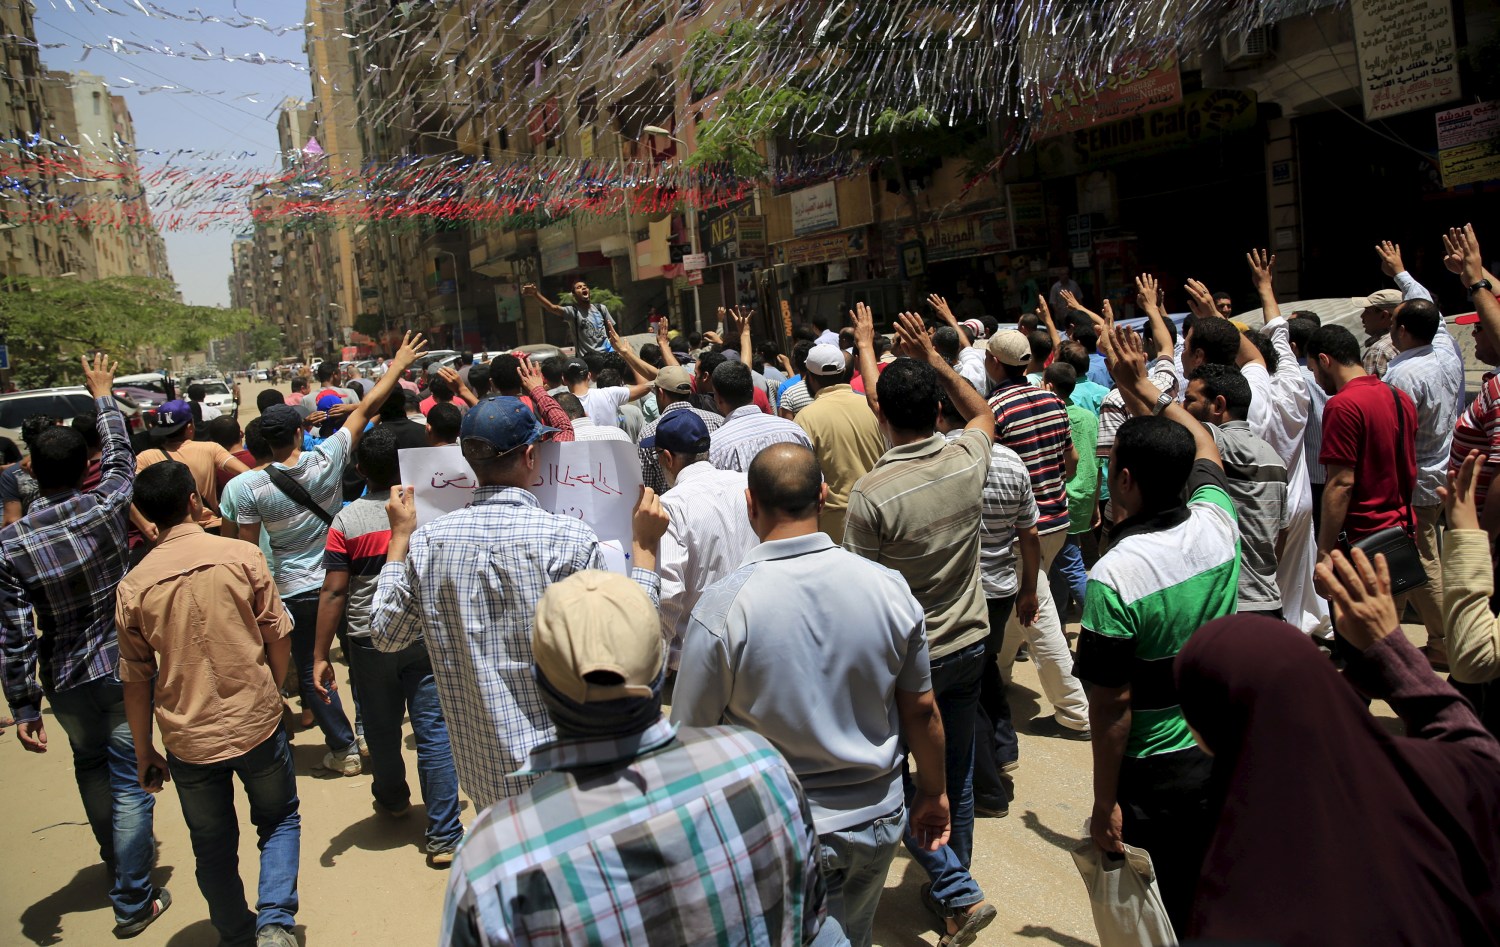 Supporters of the Muslim Brotherhood and deposed Egyptian President Mohamed Mursi shout slogans at a rally against an Egyptian court's decision to sentence Mursi and other leaders to death, as they march under street decoration to mark the holy month of Ramadan in Al Haram street near Giza square, south of Cairo, Egypt June 19, 2015. Mursi will appeal against a conviction for violence, kidnapping and torture imposed by a court over the killing of protesters, his lawyers were quoted as saying by state media on Thursday. REUTERS/Amr Abdallah Dalsh - GF10000133229